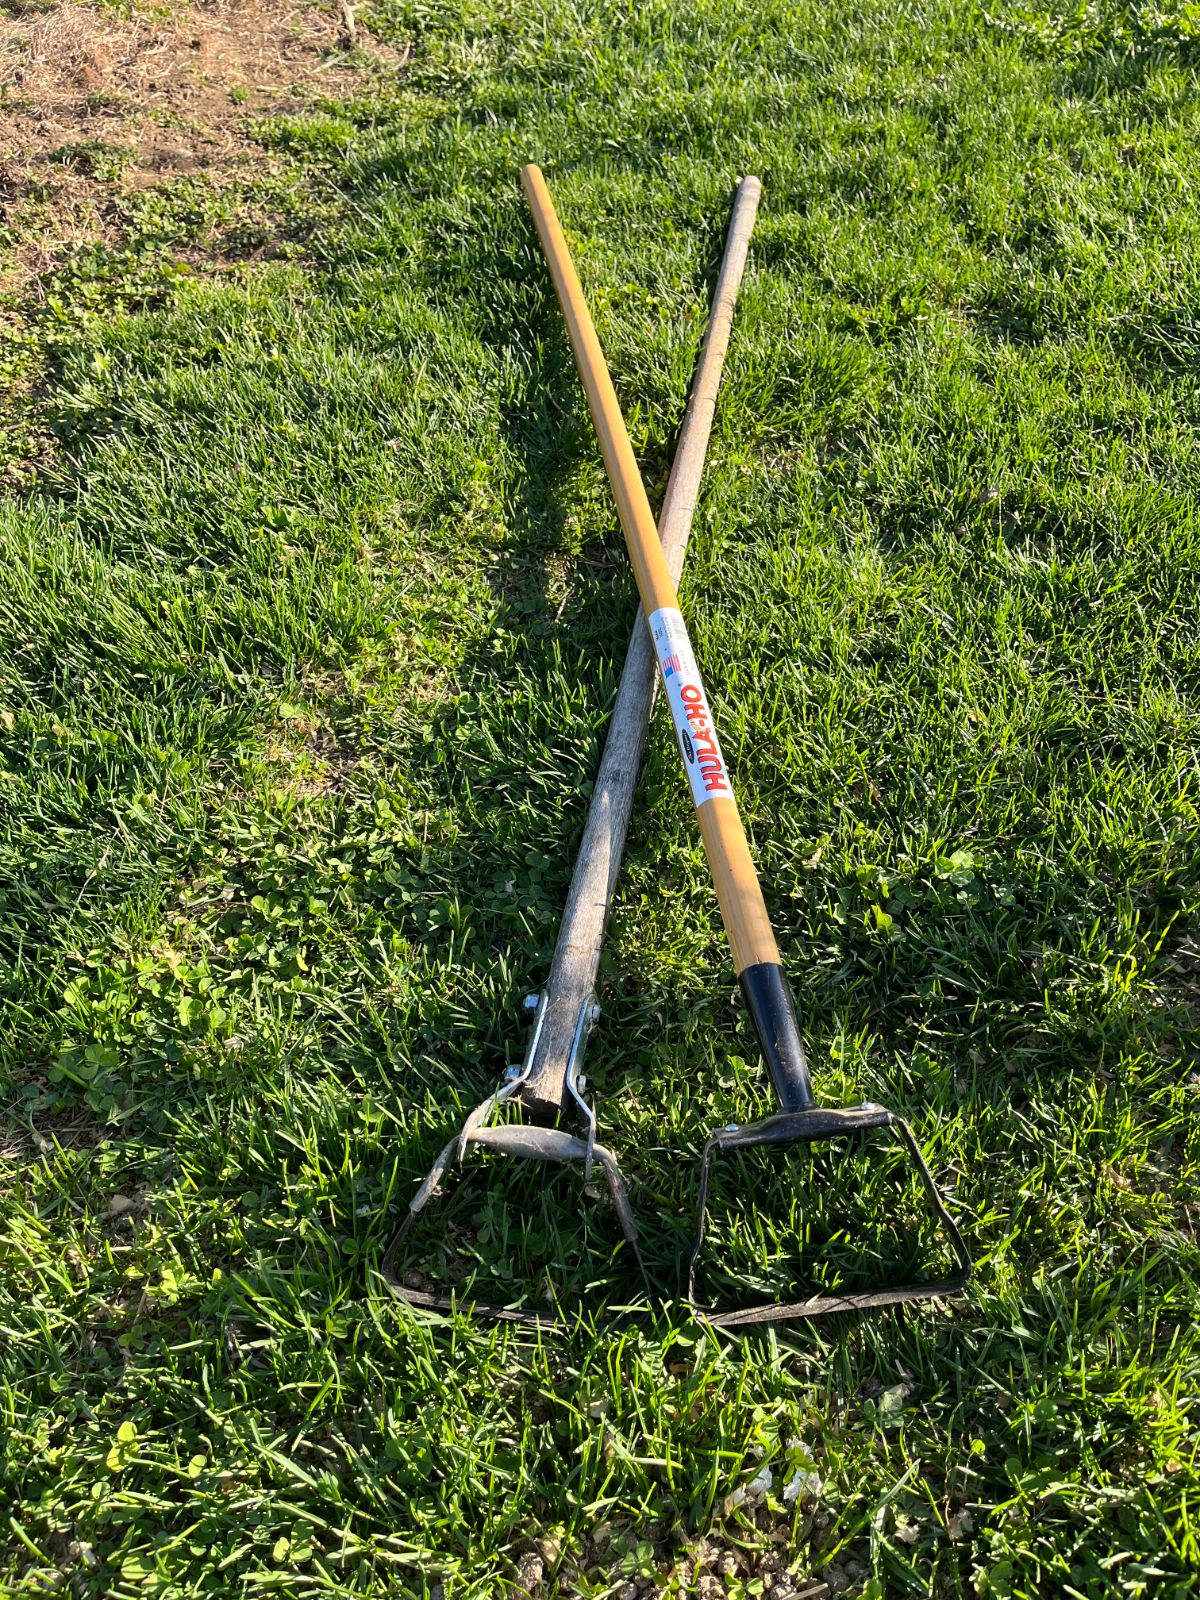 An old and a new hula hoe laid out on grass